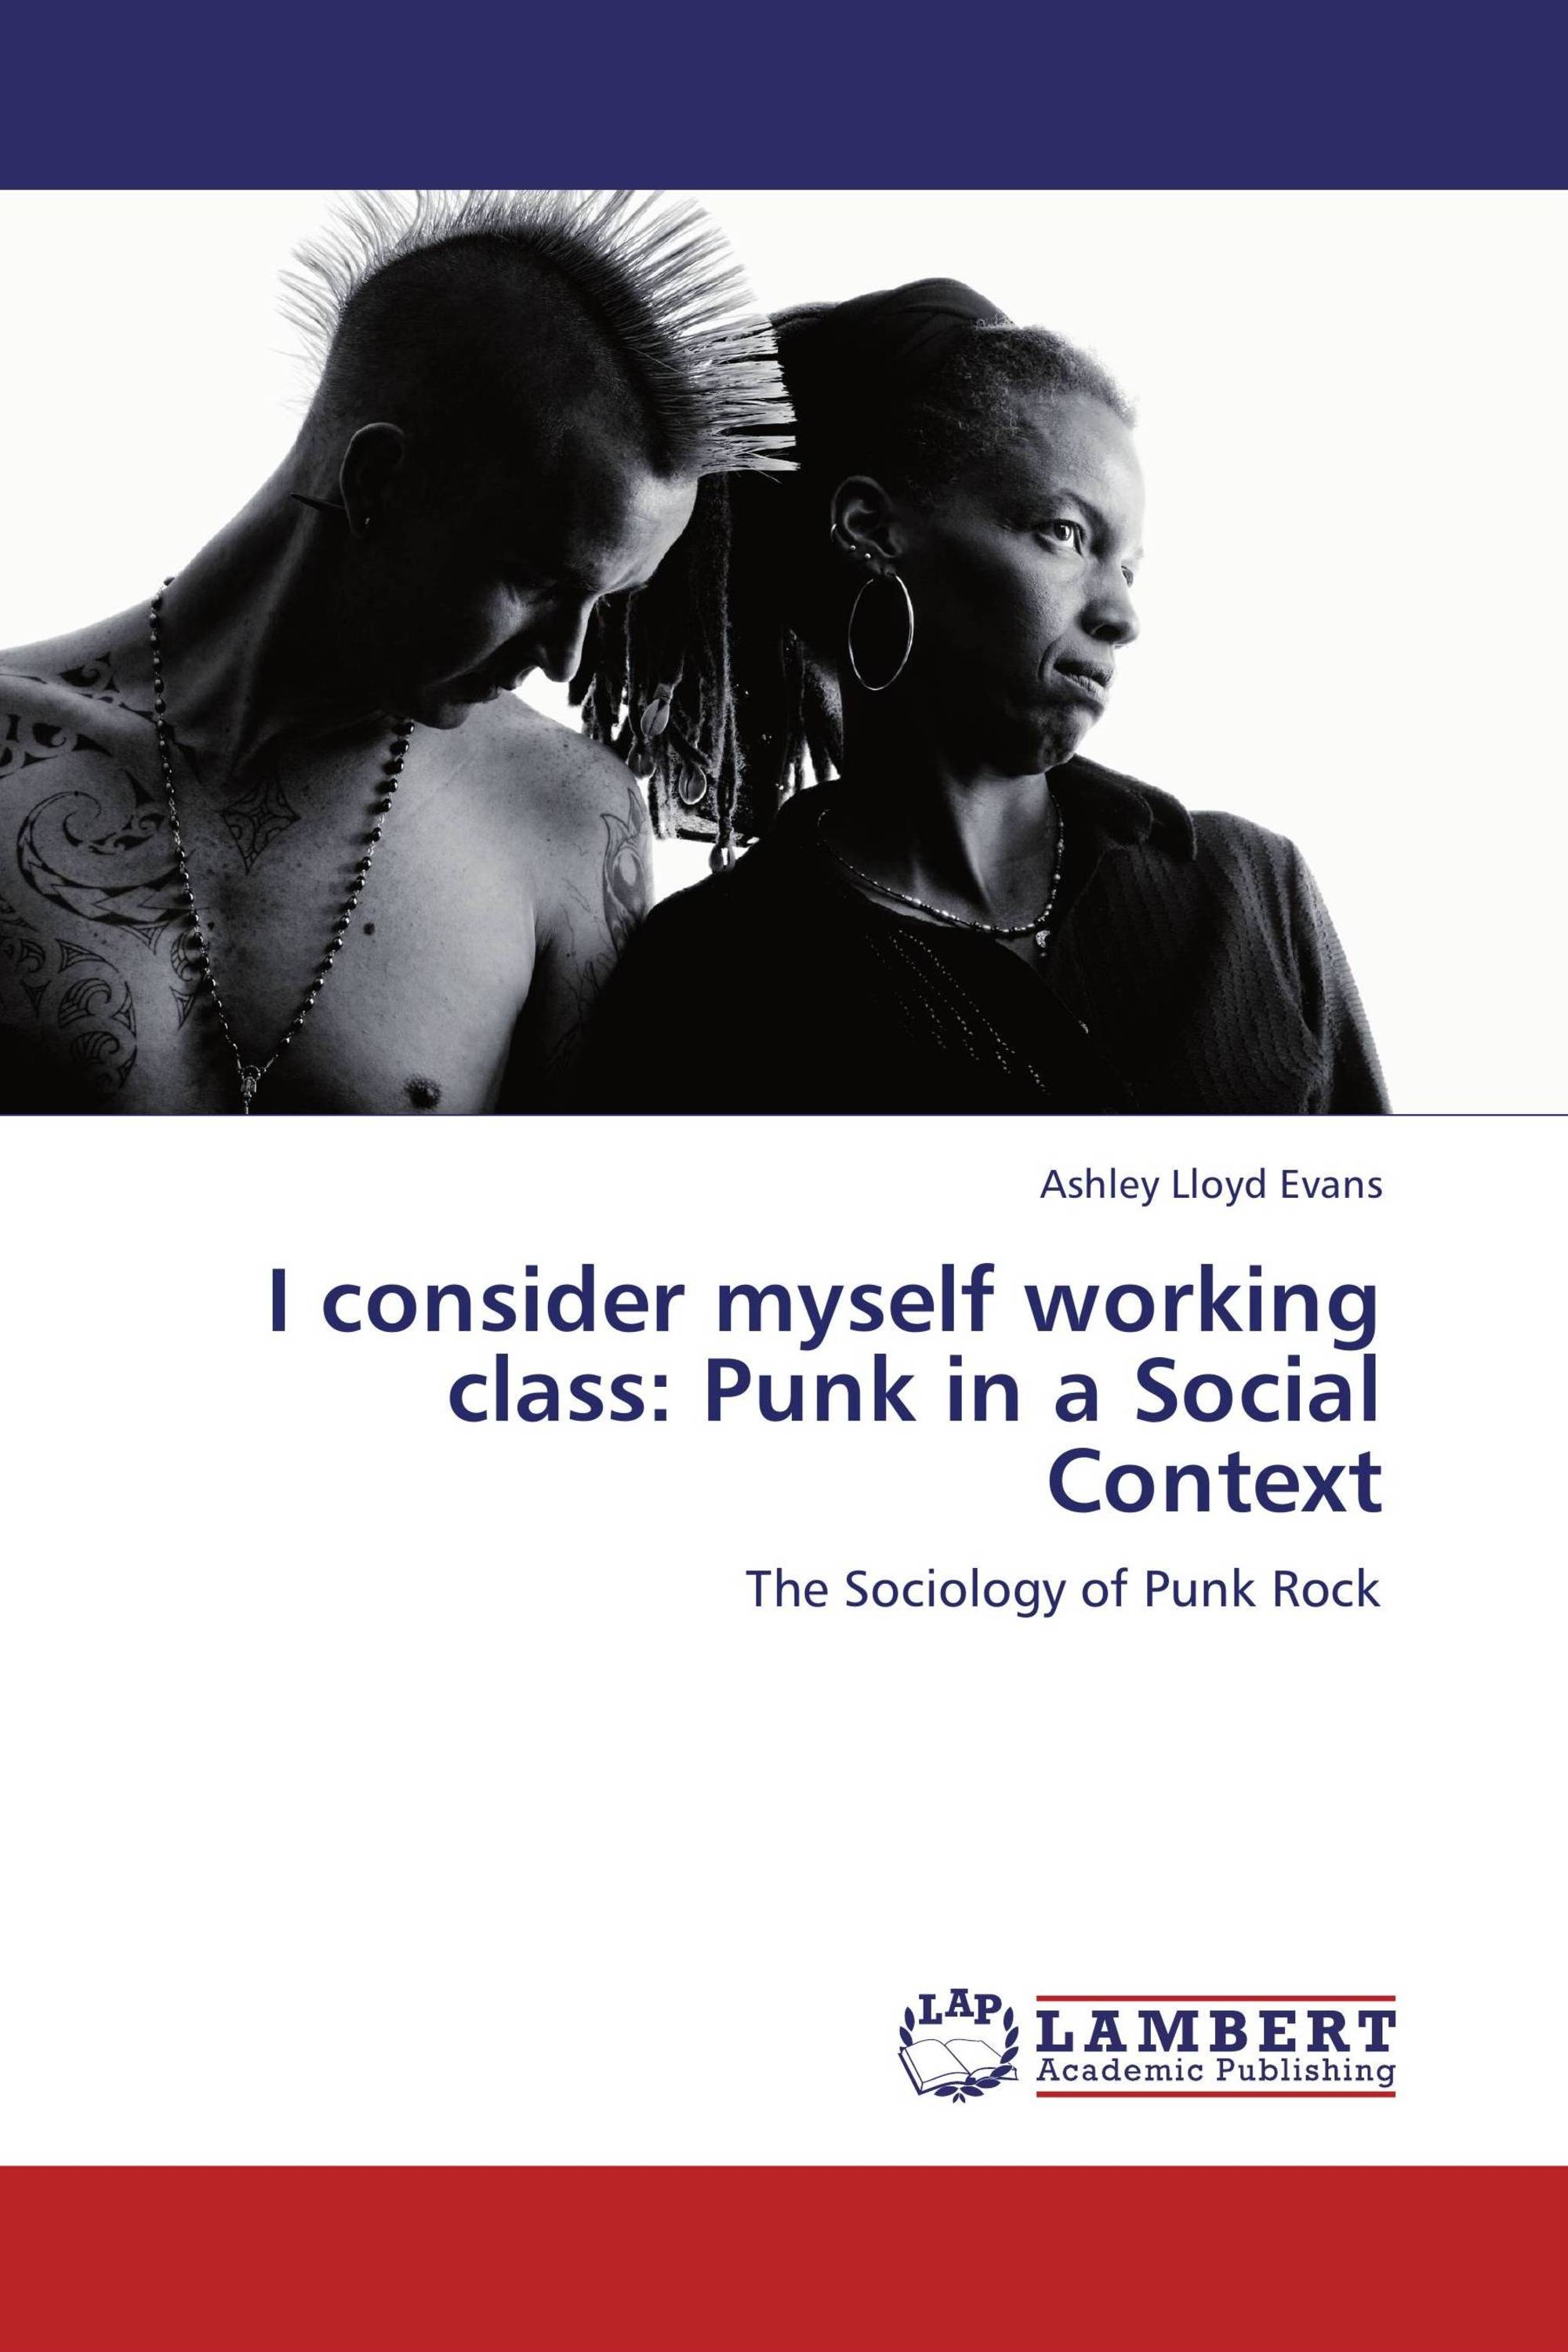 I consider myself working class: Punk in a Social Context